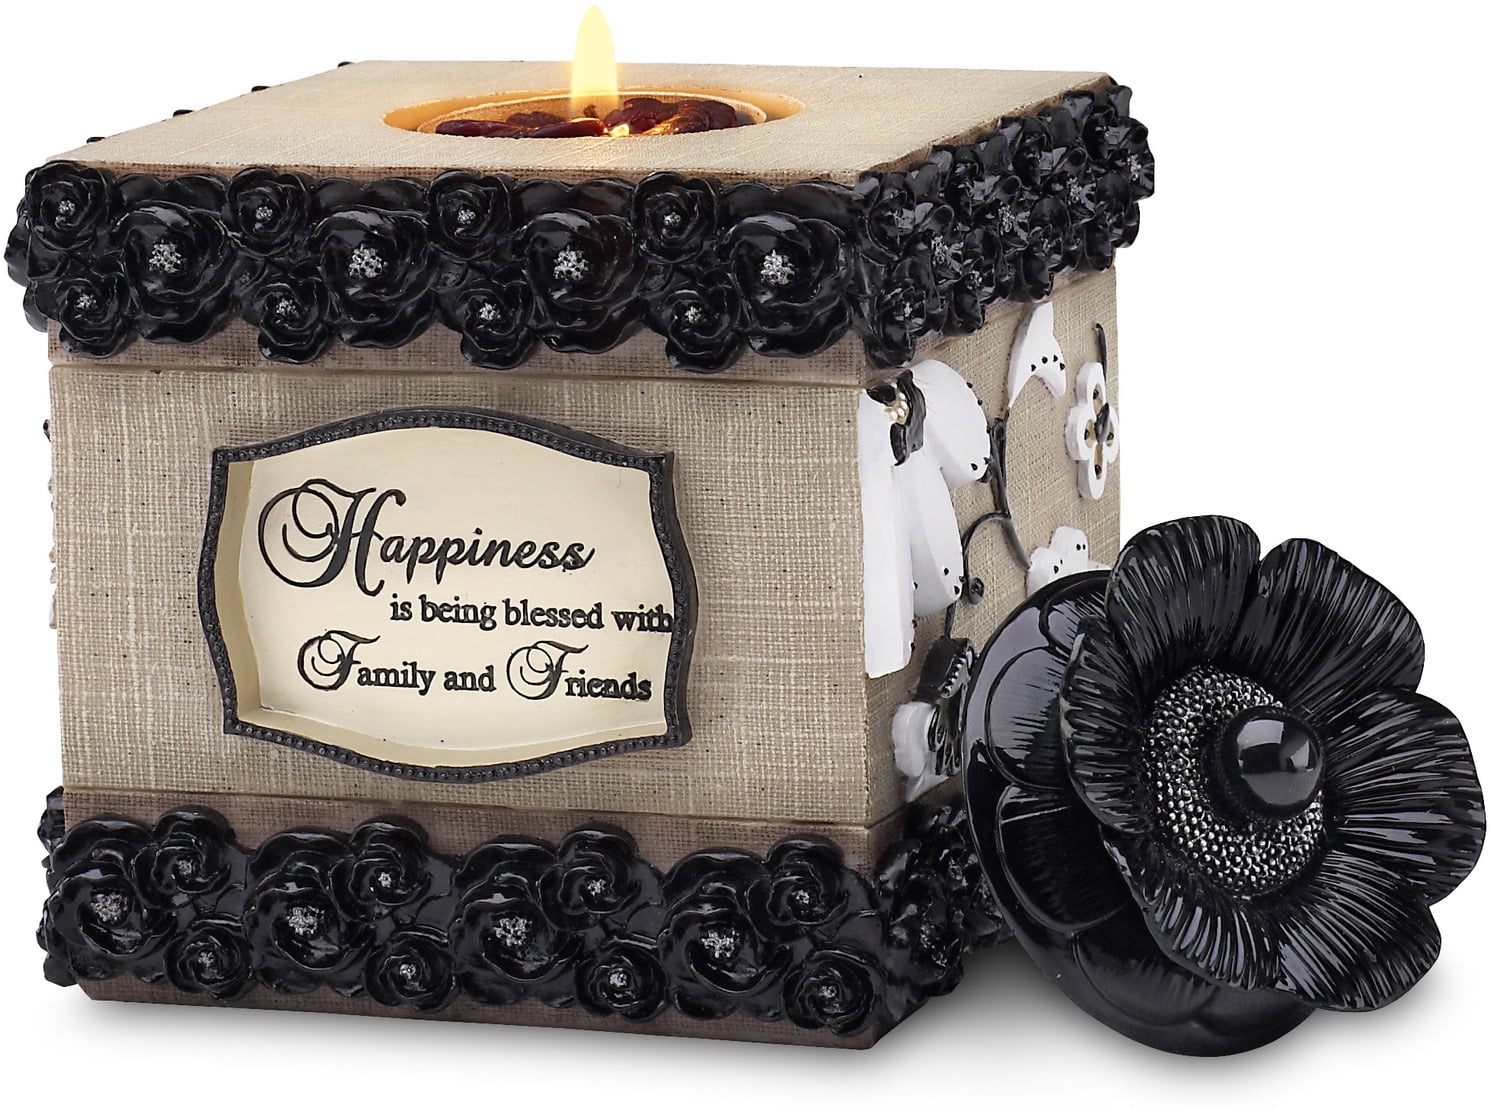 Sedona Spirit Circle of Friends Traditional 3 x 4.5 Inch Handcrafted Clay Tealight Candle Holder